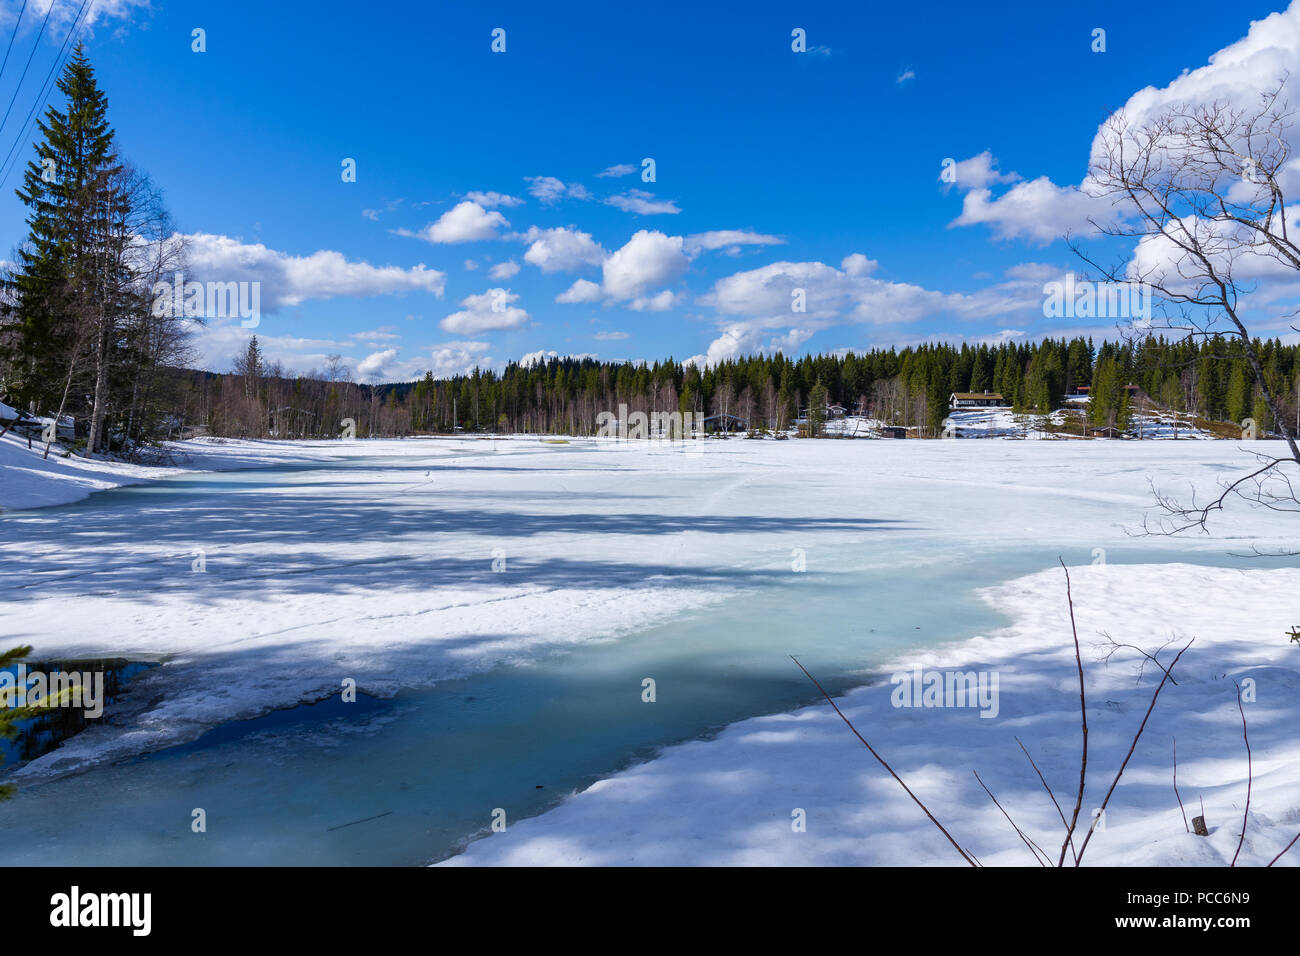 Small houses in the snowy forest overlooking the frozen lake. Norway Stock Photo